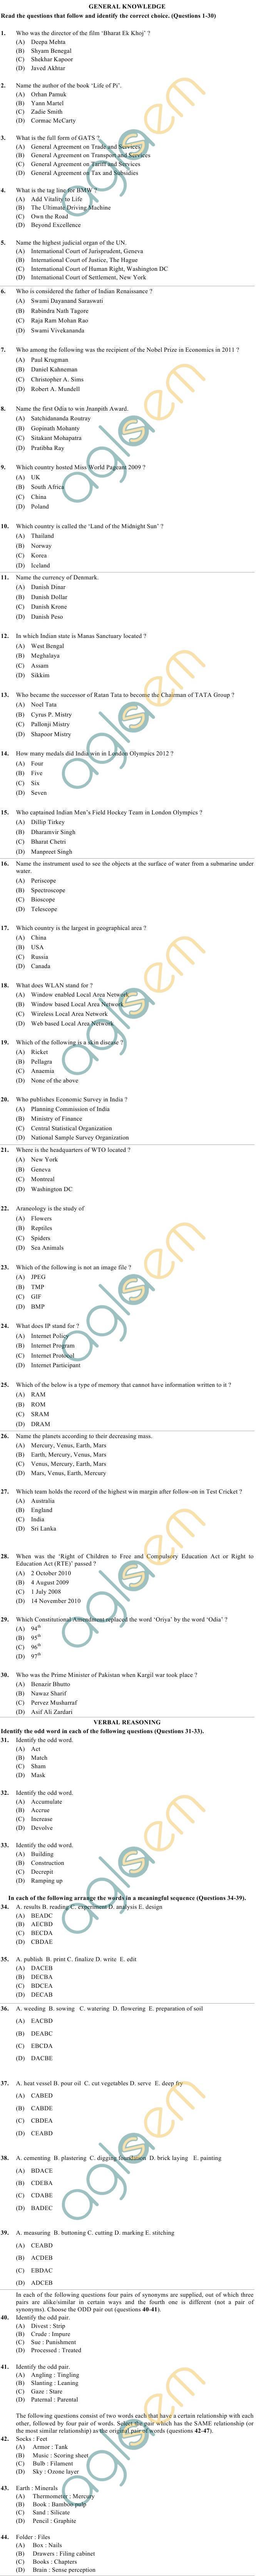 OJEE 2013 Question Paper for MAM